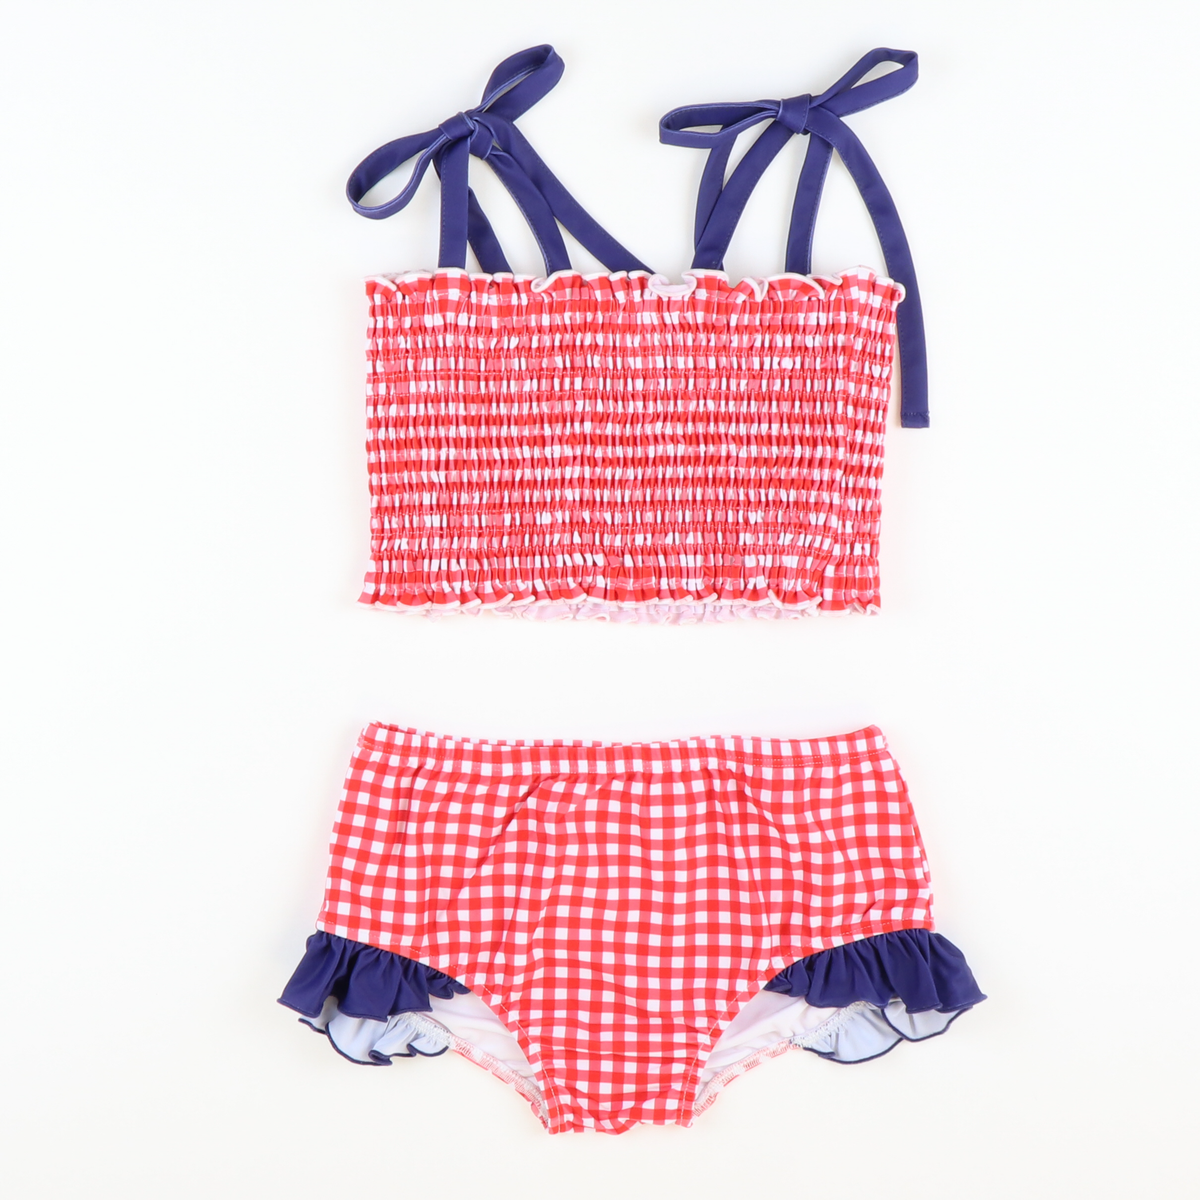 Americana Smocked Two-Piece Swimsuit - Southern Smocked Co.